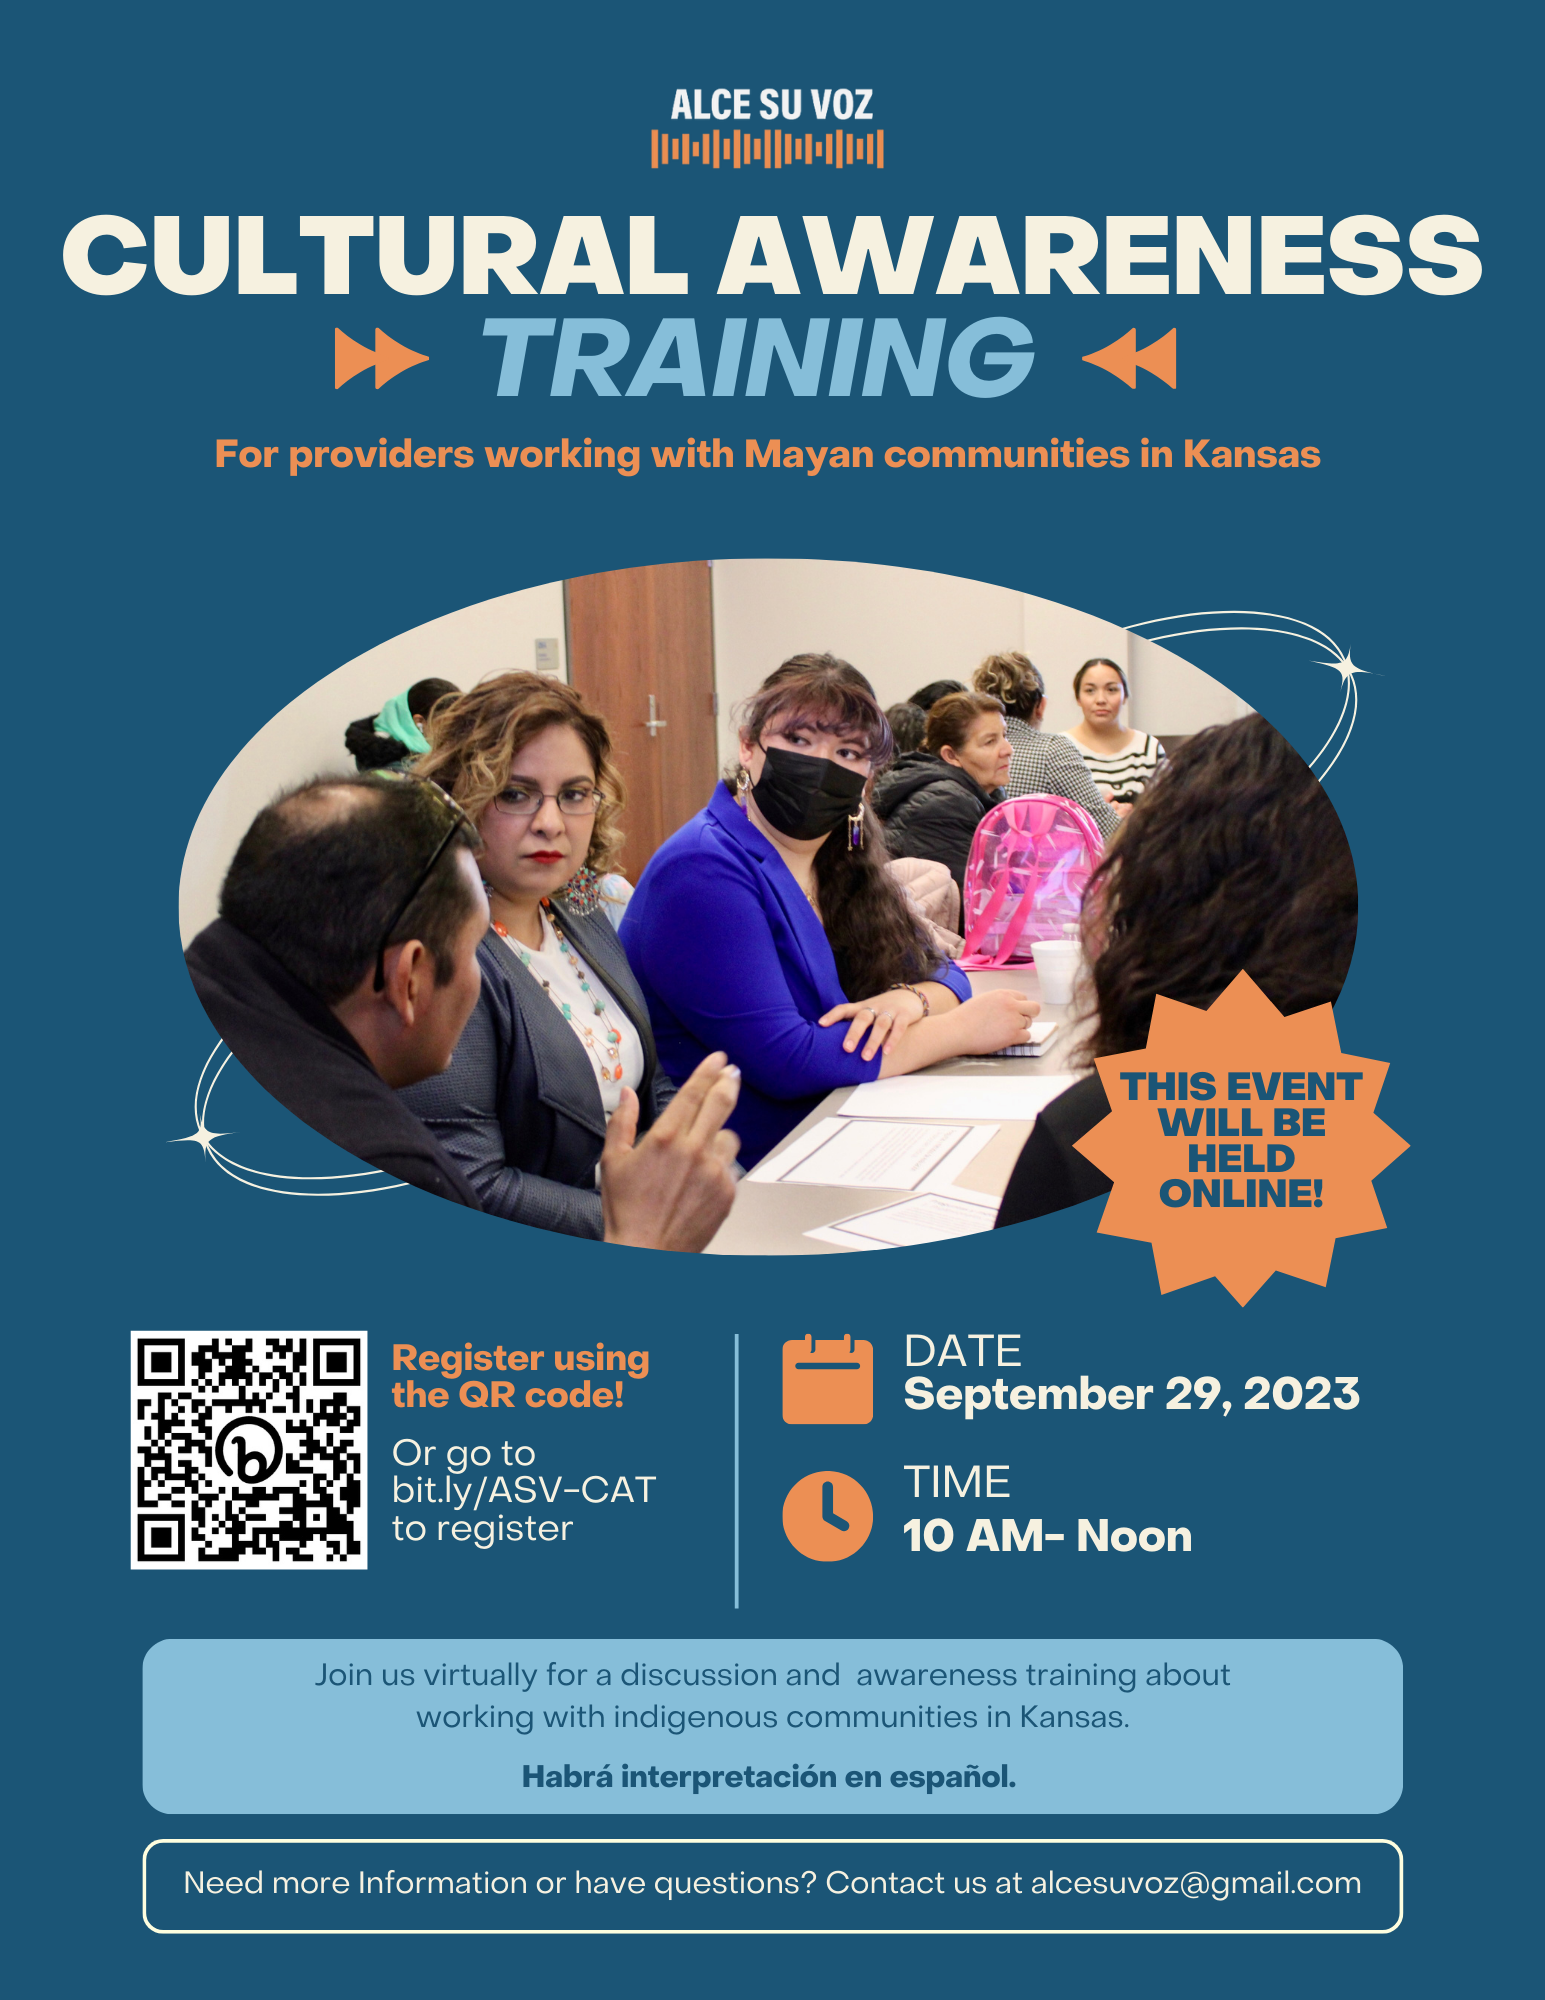 Image of the flyer with basic information for the event and photo of people in discussion